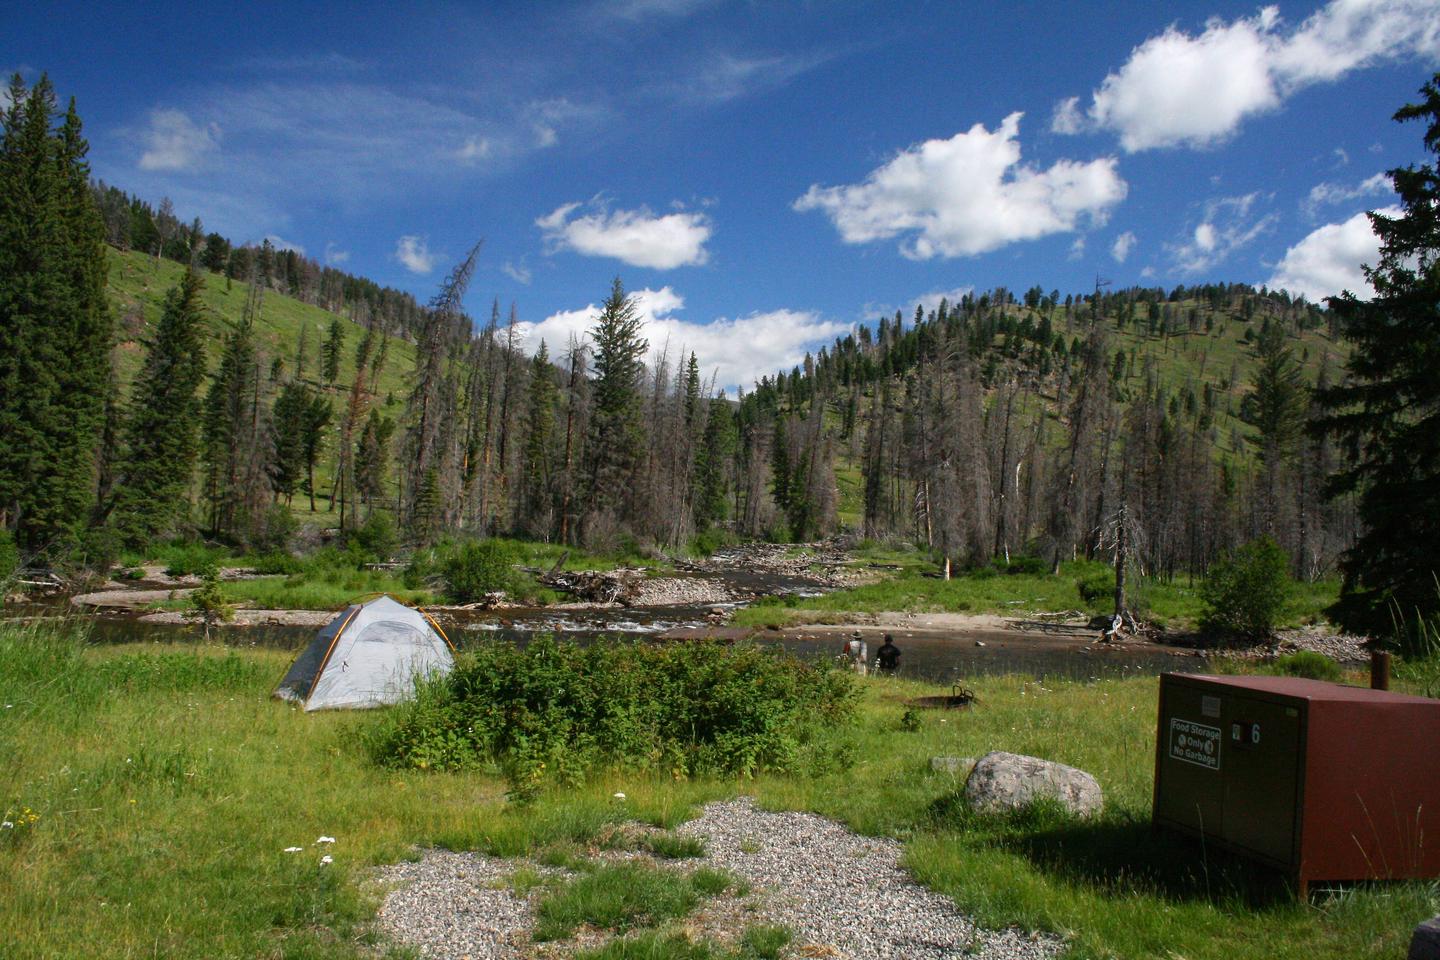 Slough Creek Campground Site #6